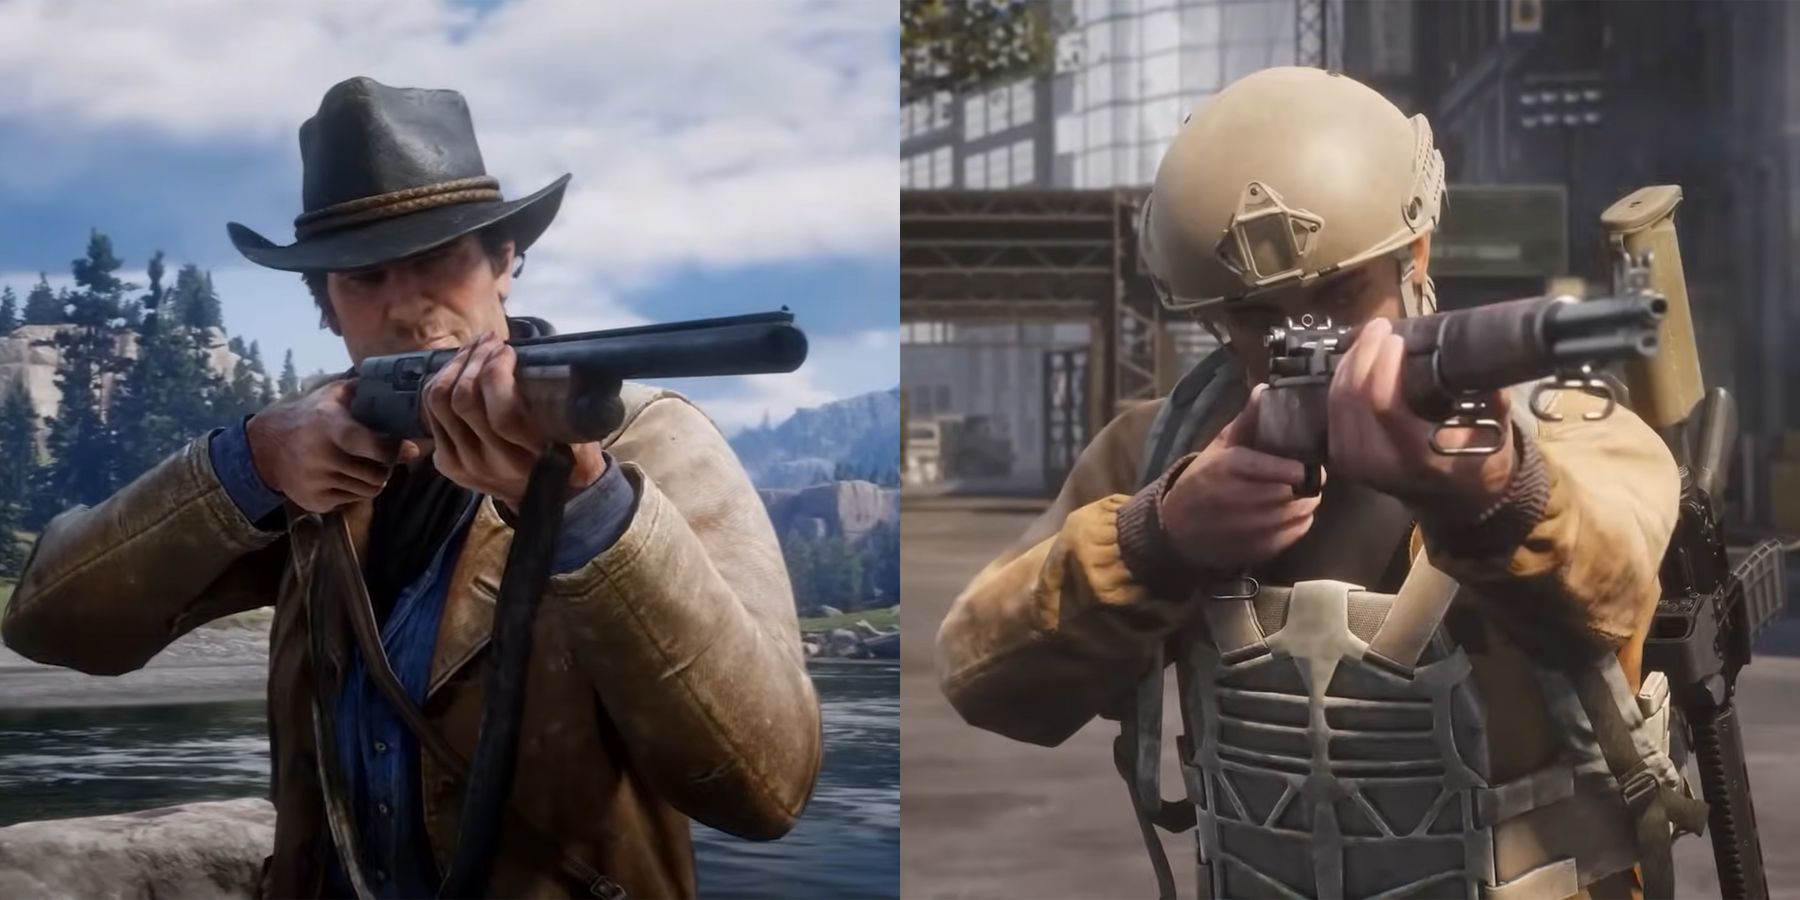 The Day Before Gameplay Trailer Side by Side Comparison Shows Similarities  to a Lot of Other Games